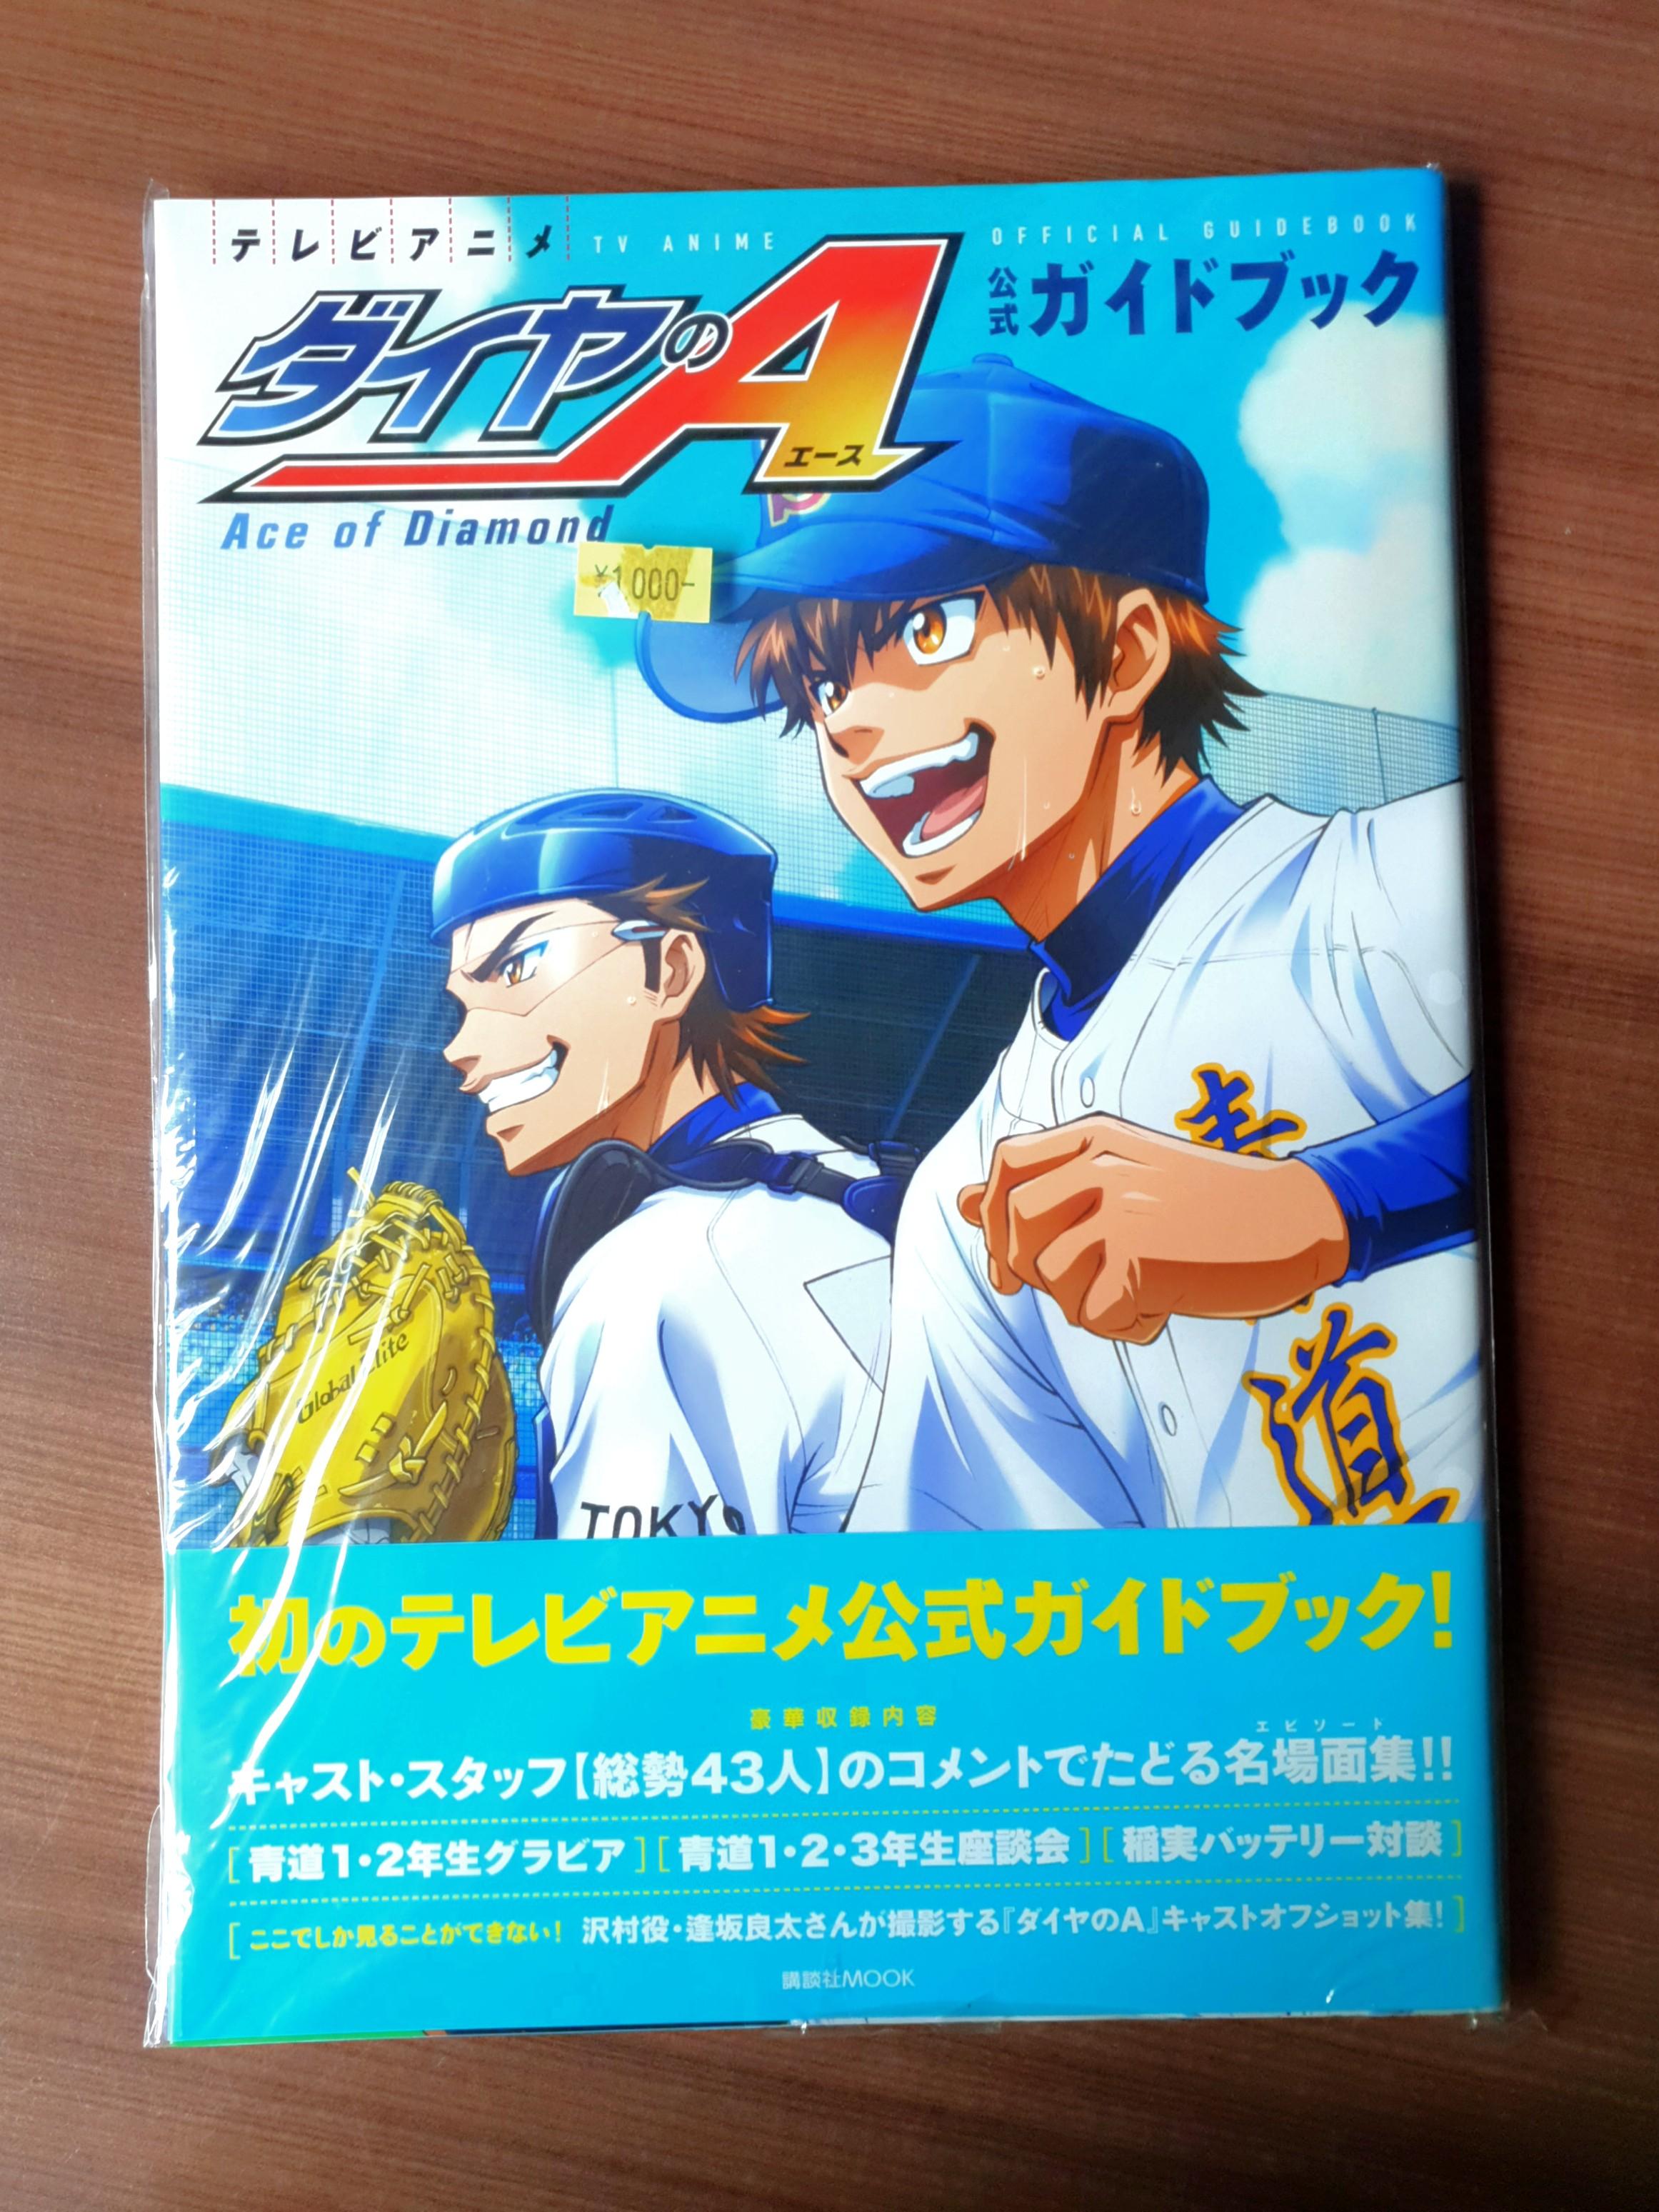 Ace Of Diamond Official Guidebook Hobbies Toys Memorabilia Collectibles Fan Merchandise On Carousell